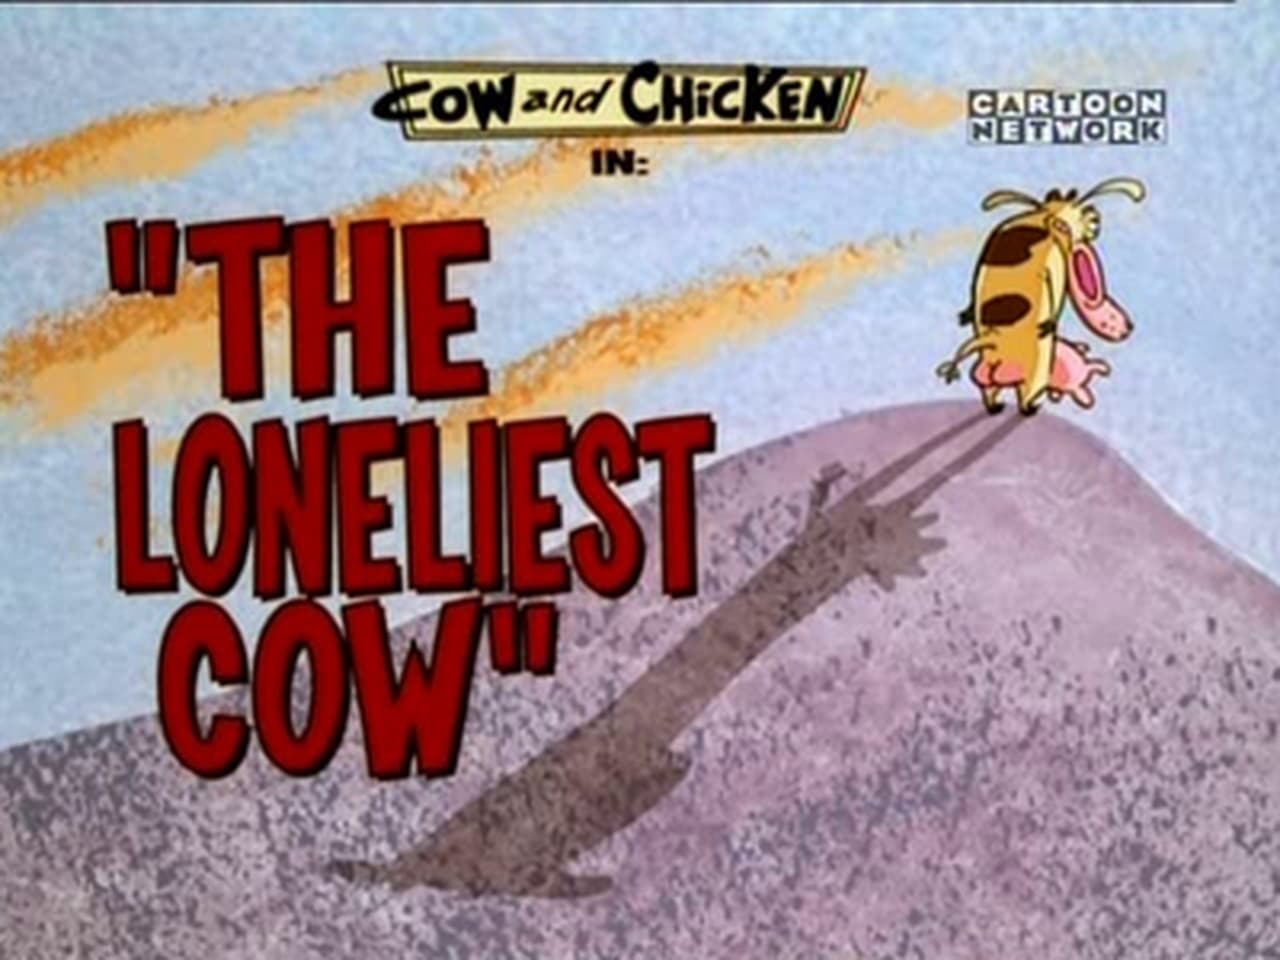 Cow and Chicken - Season 4 Episode 18 : The Loneliest Cow